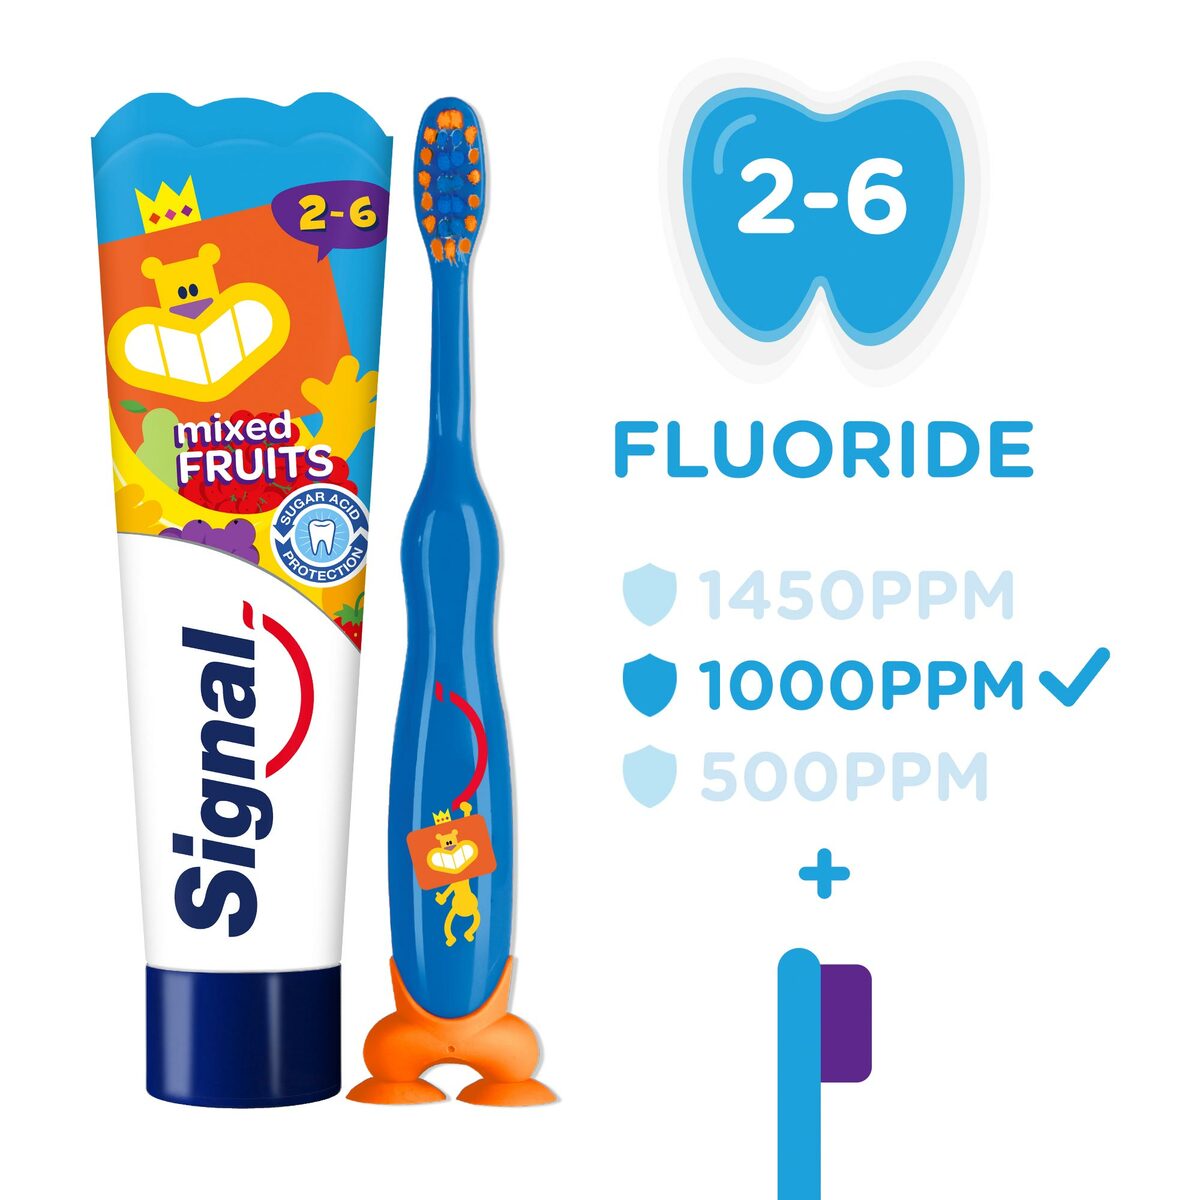 Signal Sugar Acid Protection Kids Toothpaste Strawberry 75ml